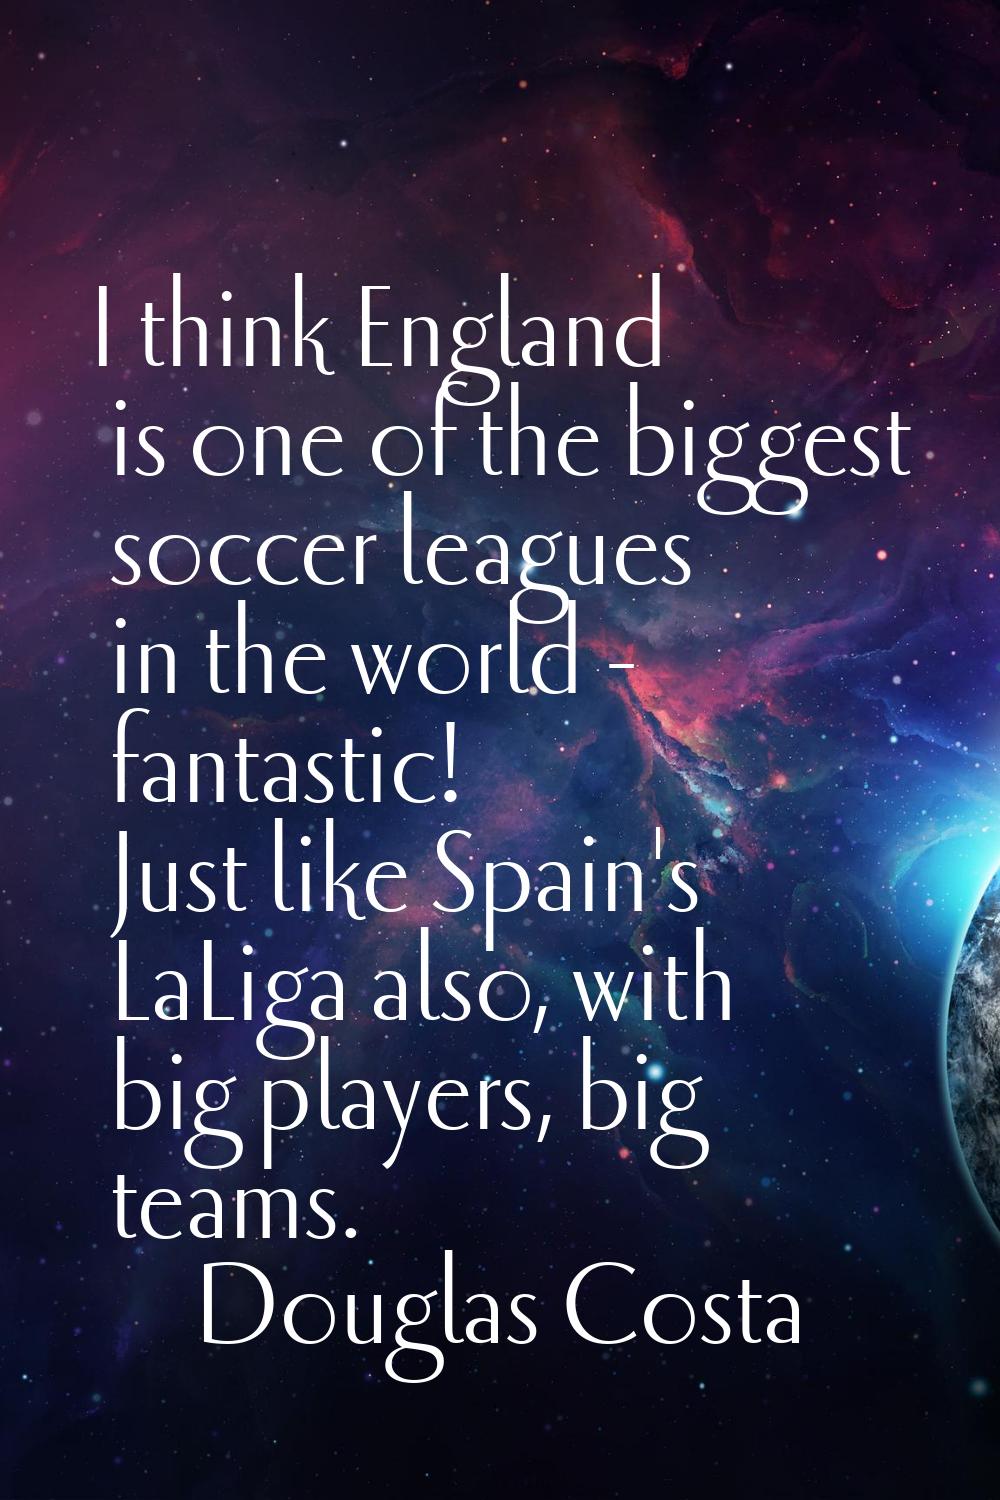 I think England is one of the biggest soccer leagues in the world - fantastic! Just like Spain's La